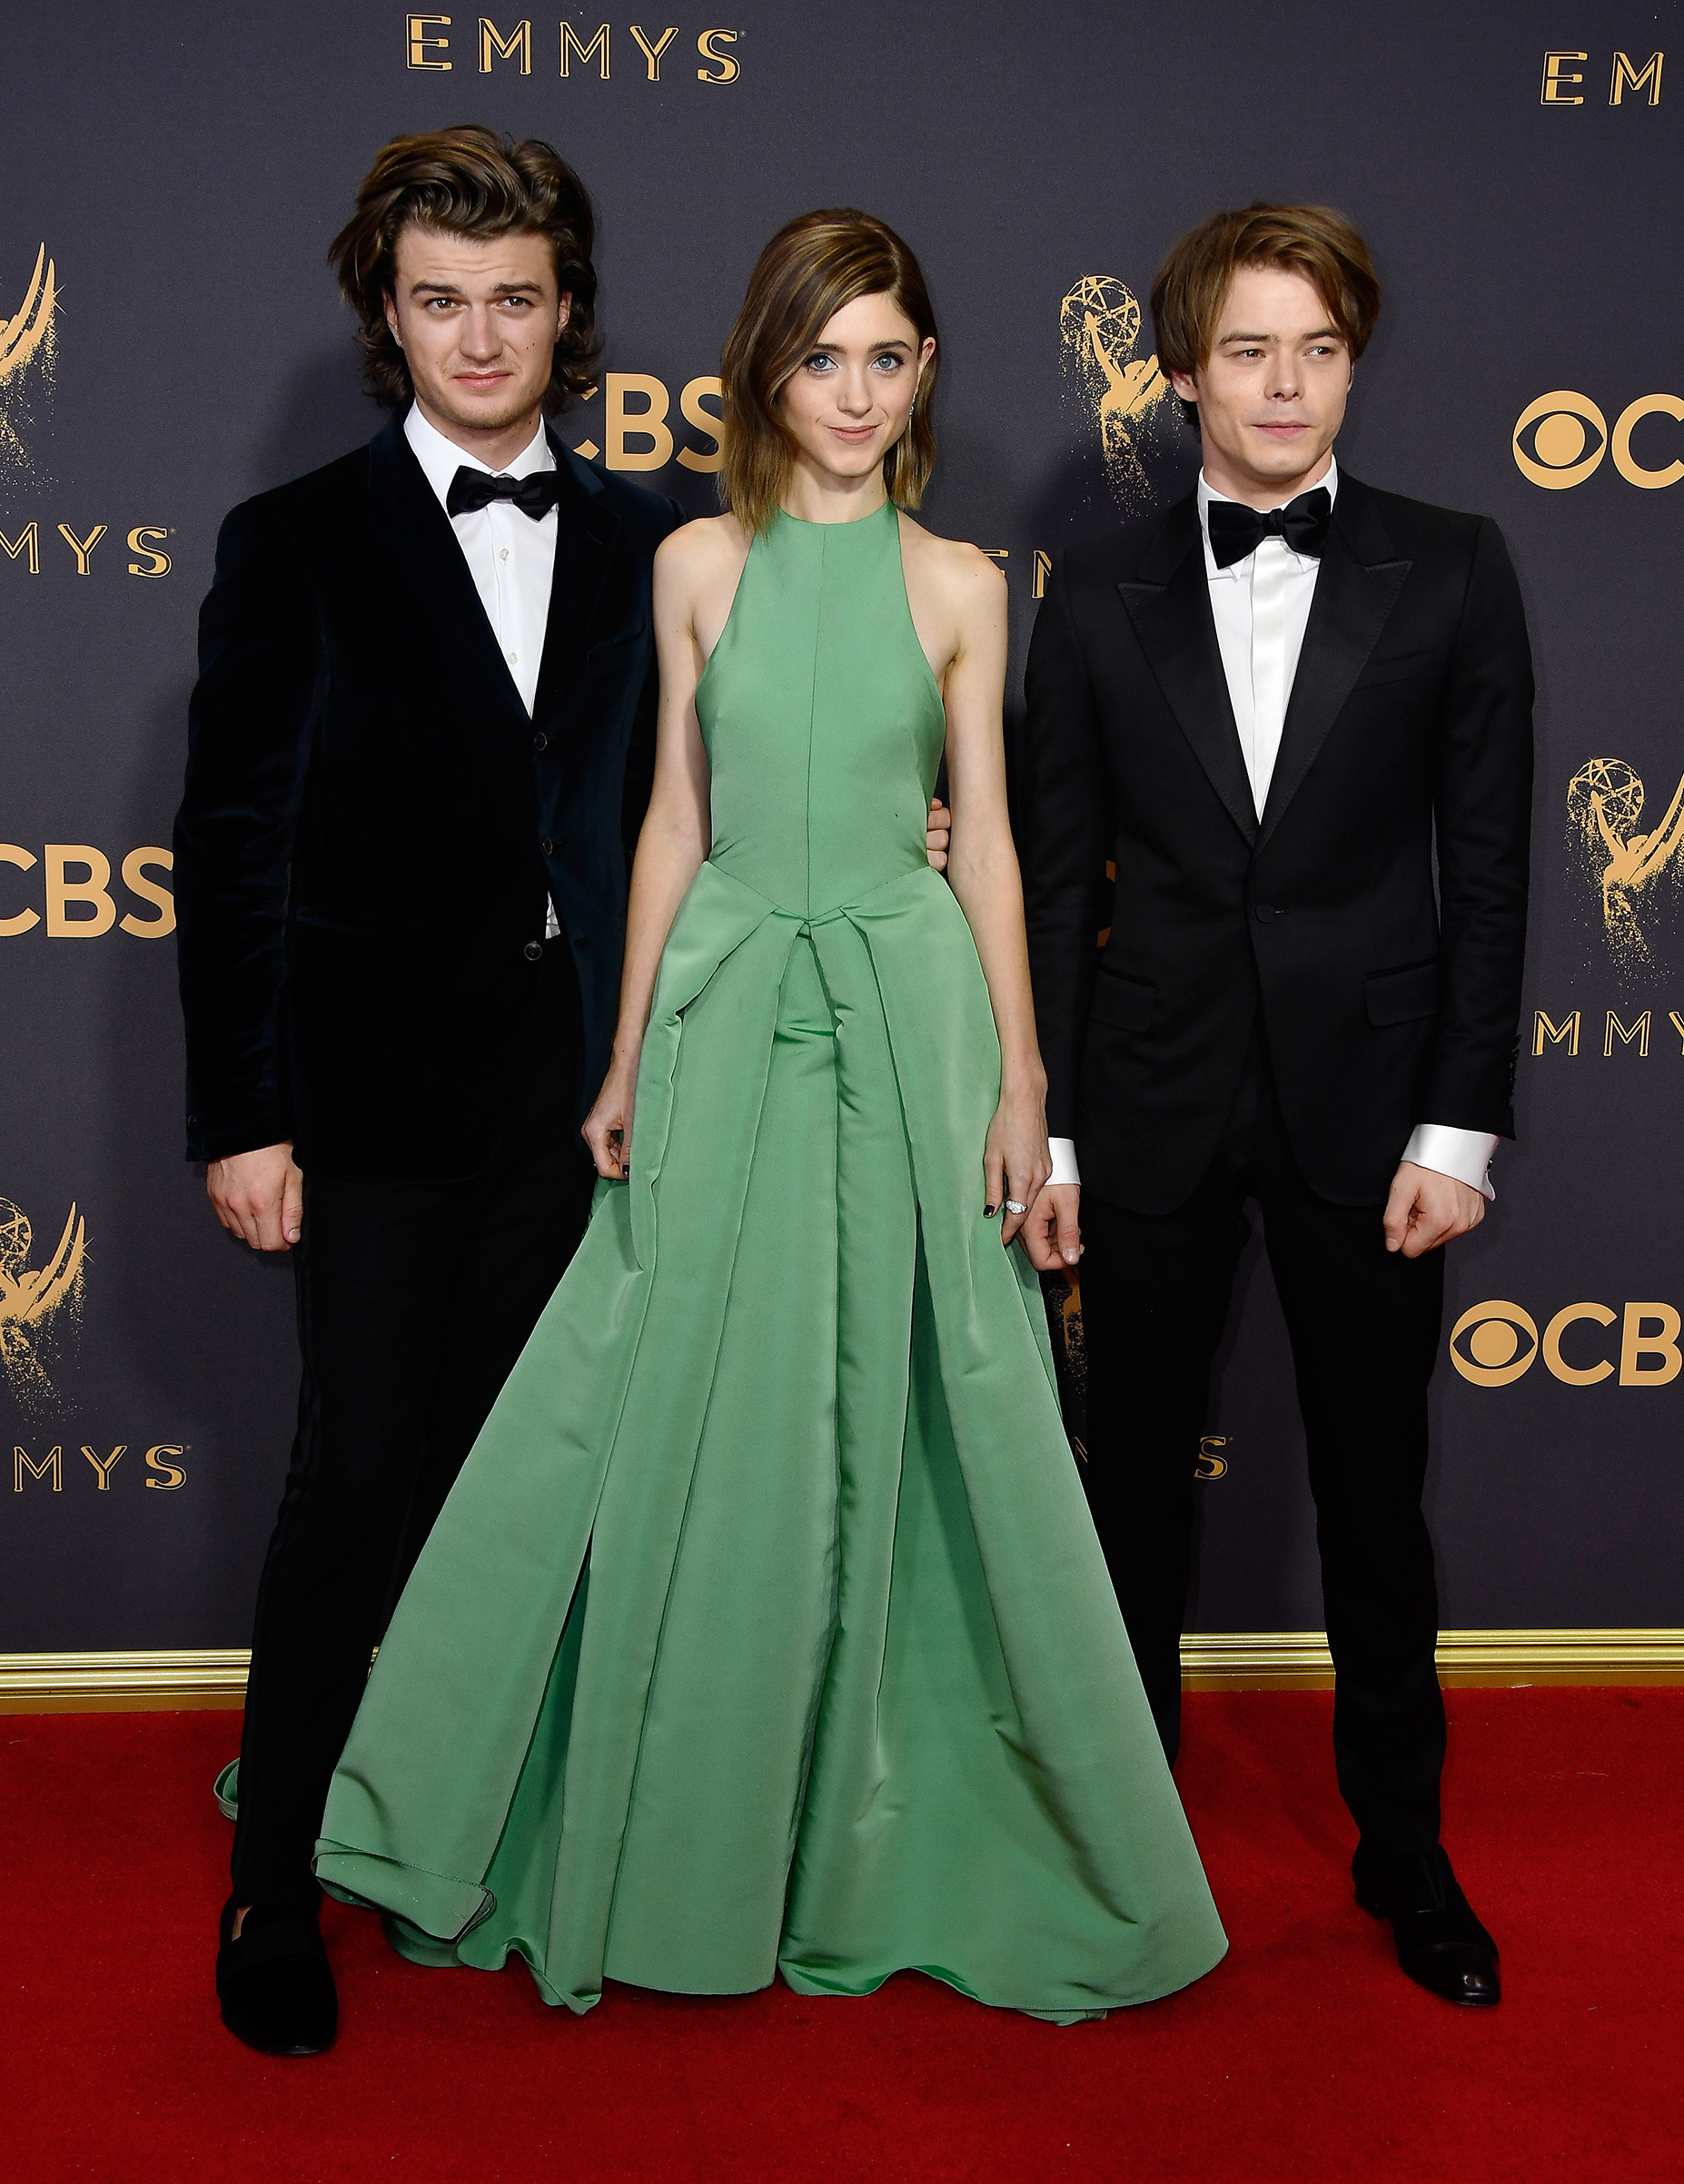 (L-R) Actors Joe Keery, Natalia Dyer and Charlie Heaton attend the 69th Annual Primetime Emmy Awards at Microsoft Theater on September 17, 2017 in Los Angeles, California.